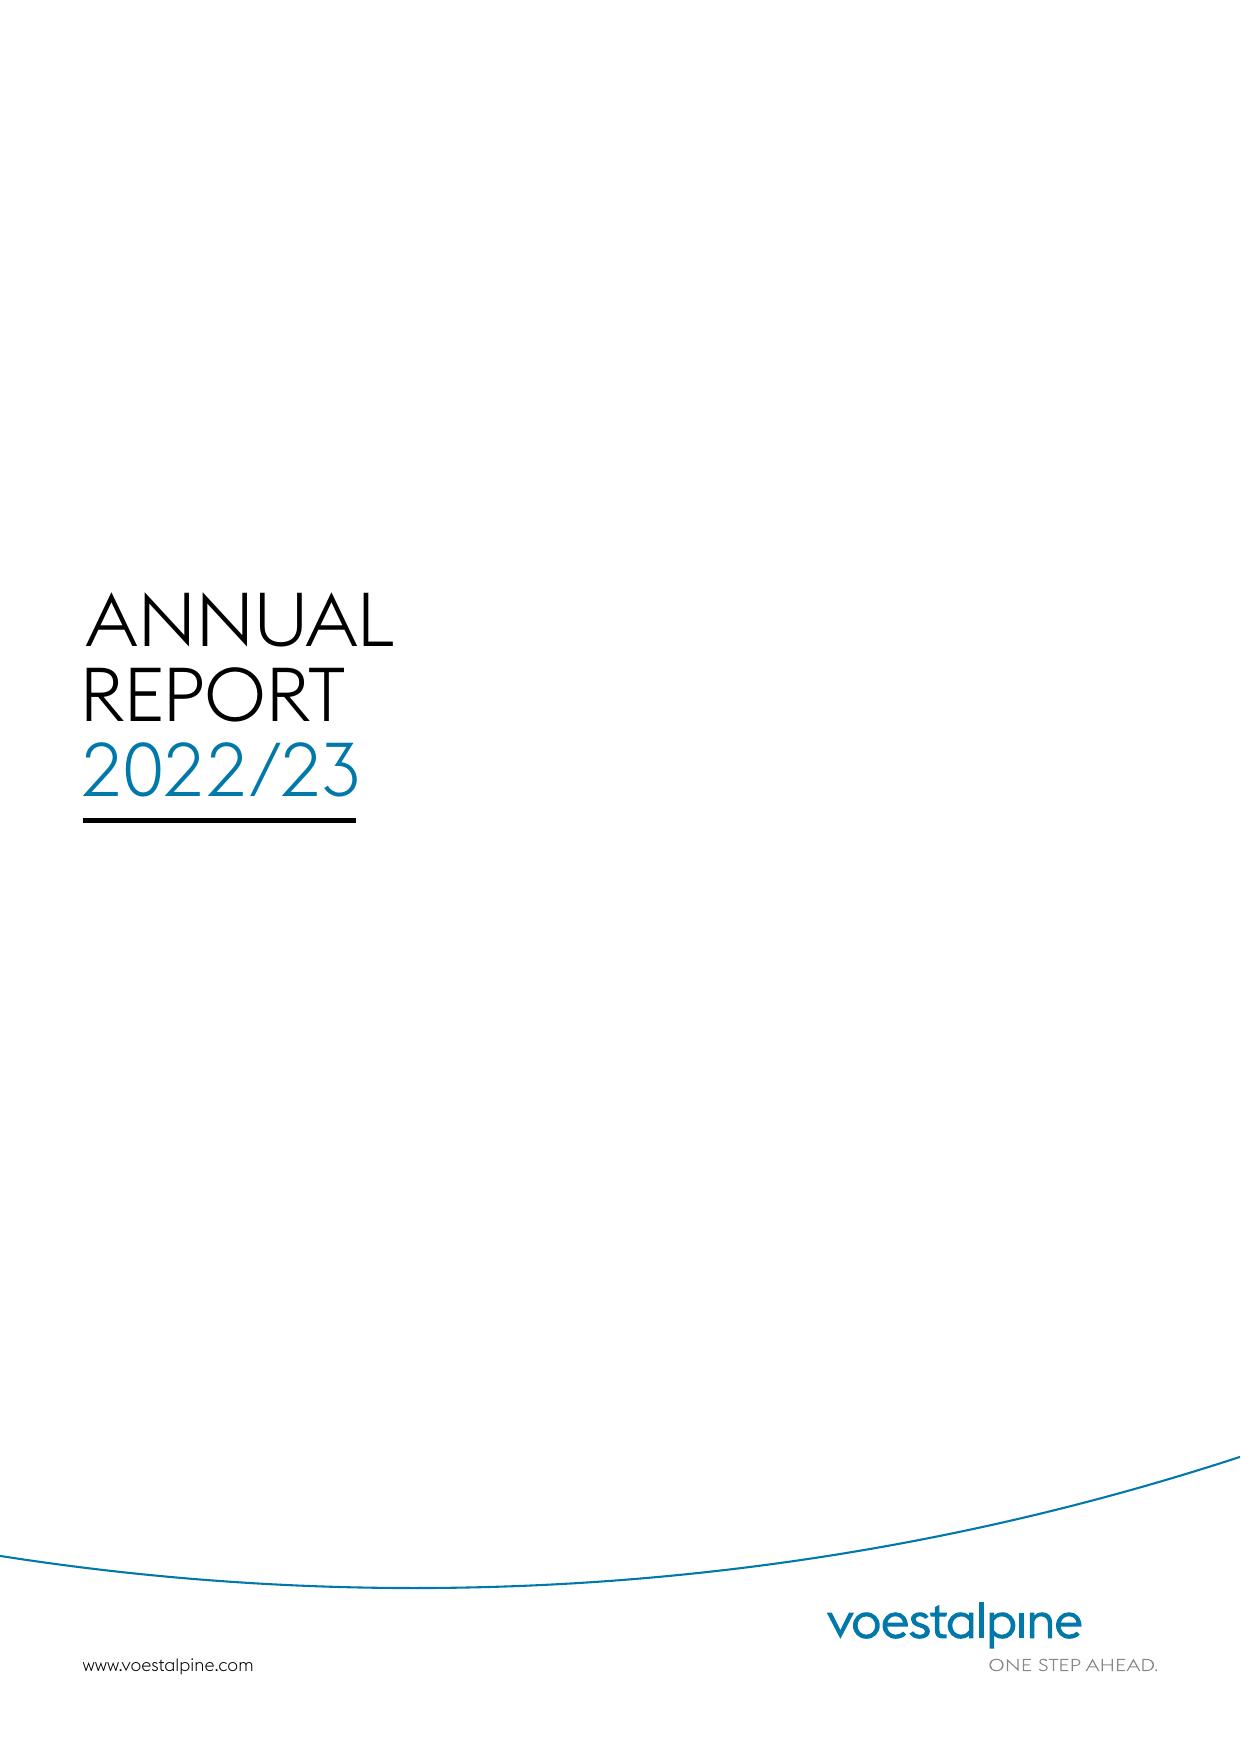 AKG-GROUP 2022 Annual Report